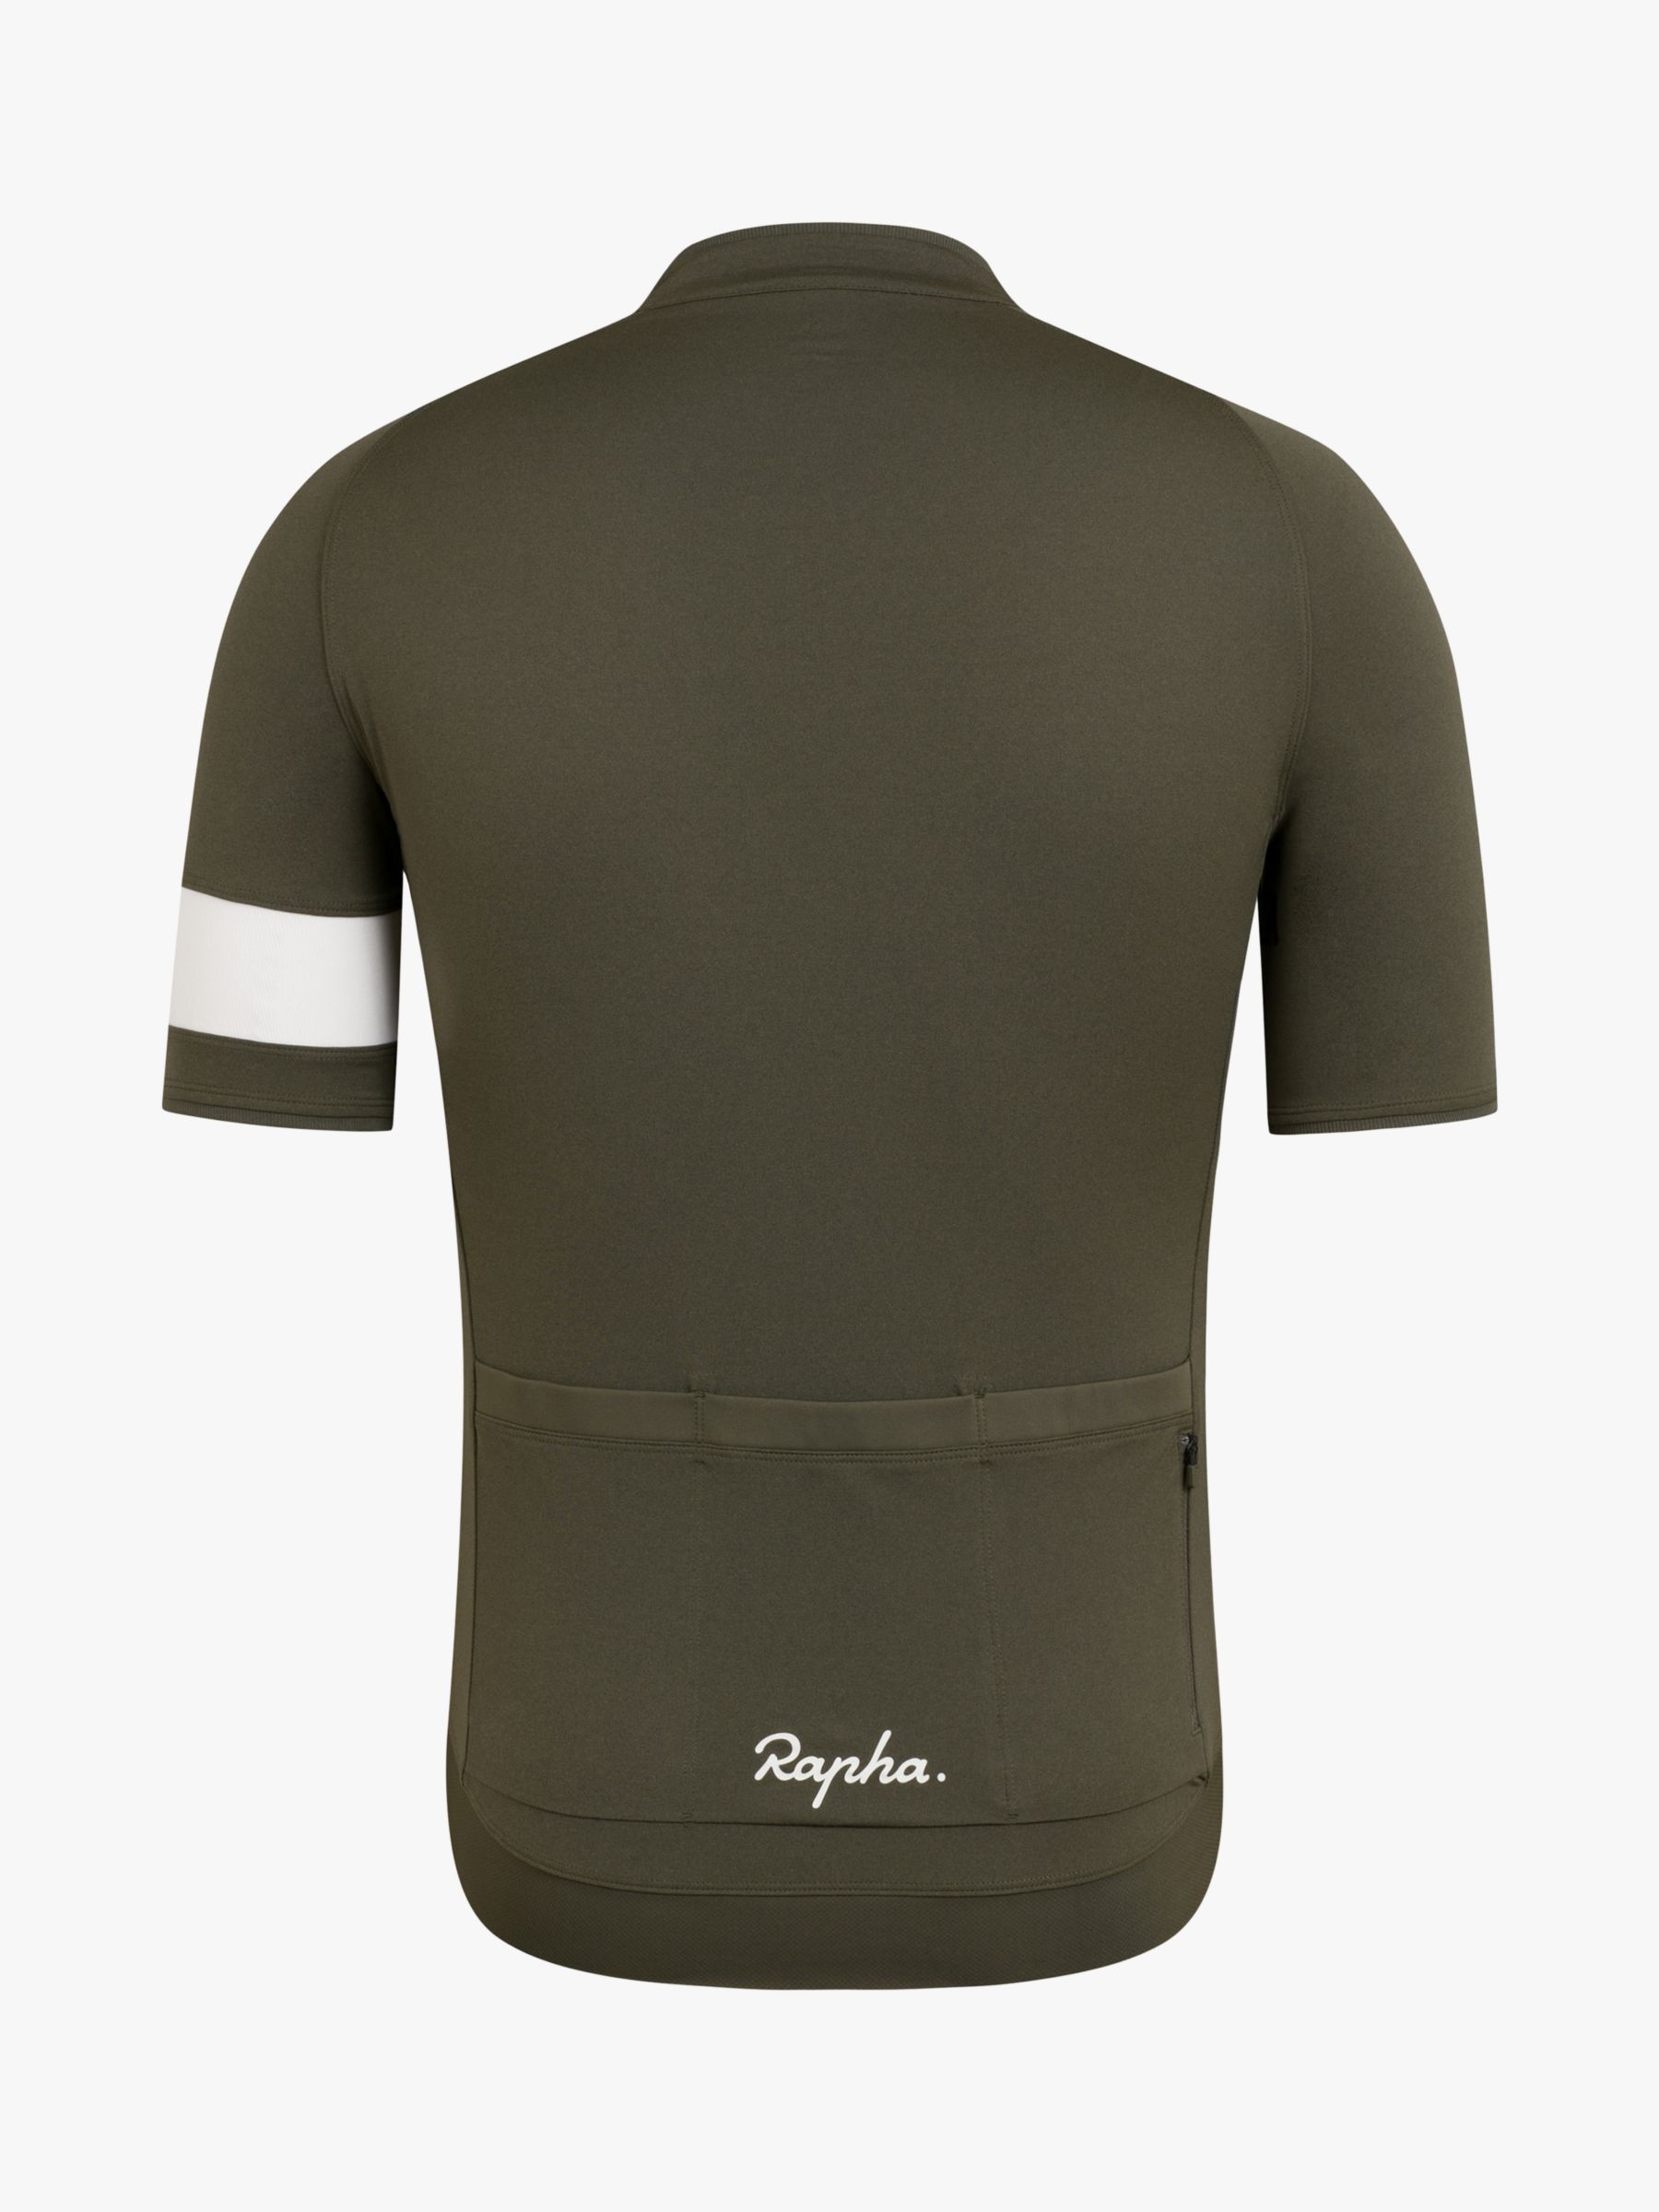 Buy Rapha Core Jersey Short Sleeve Cycling Top Online at johnlewis.com